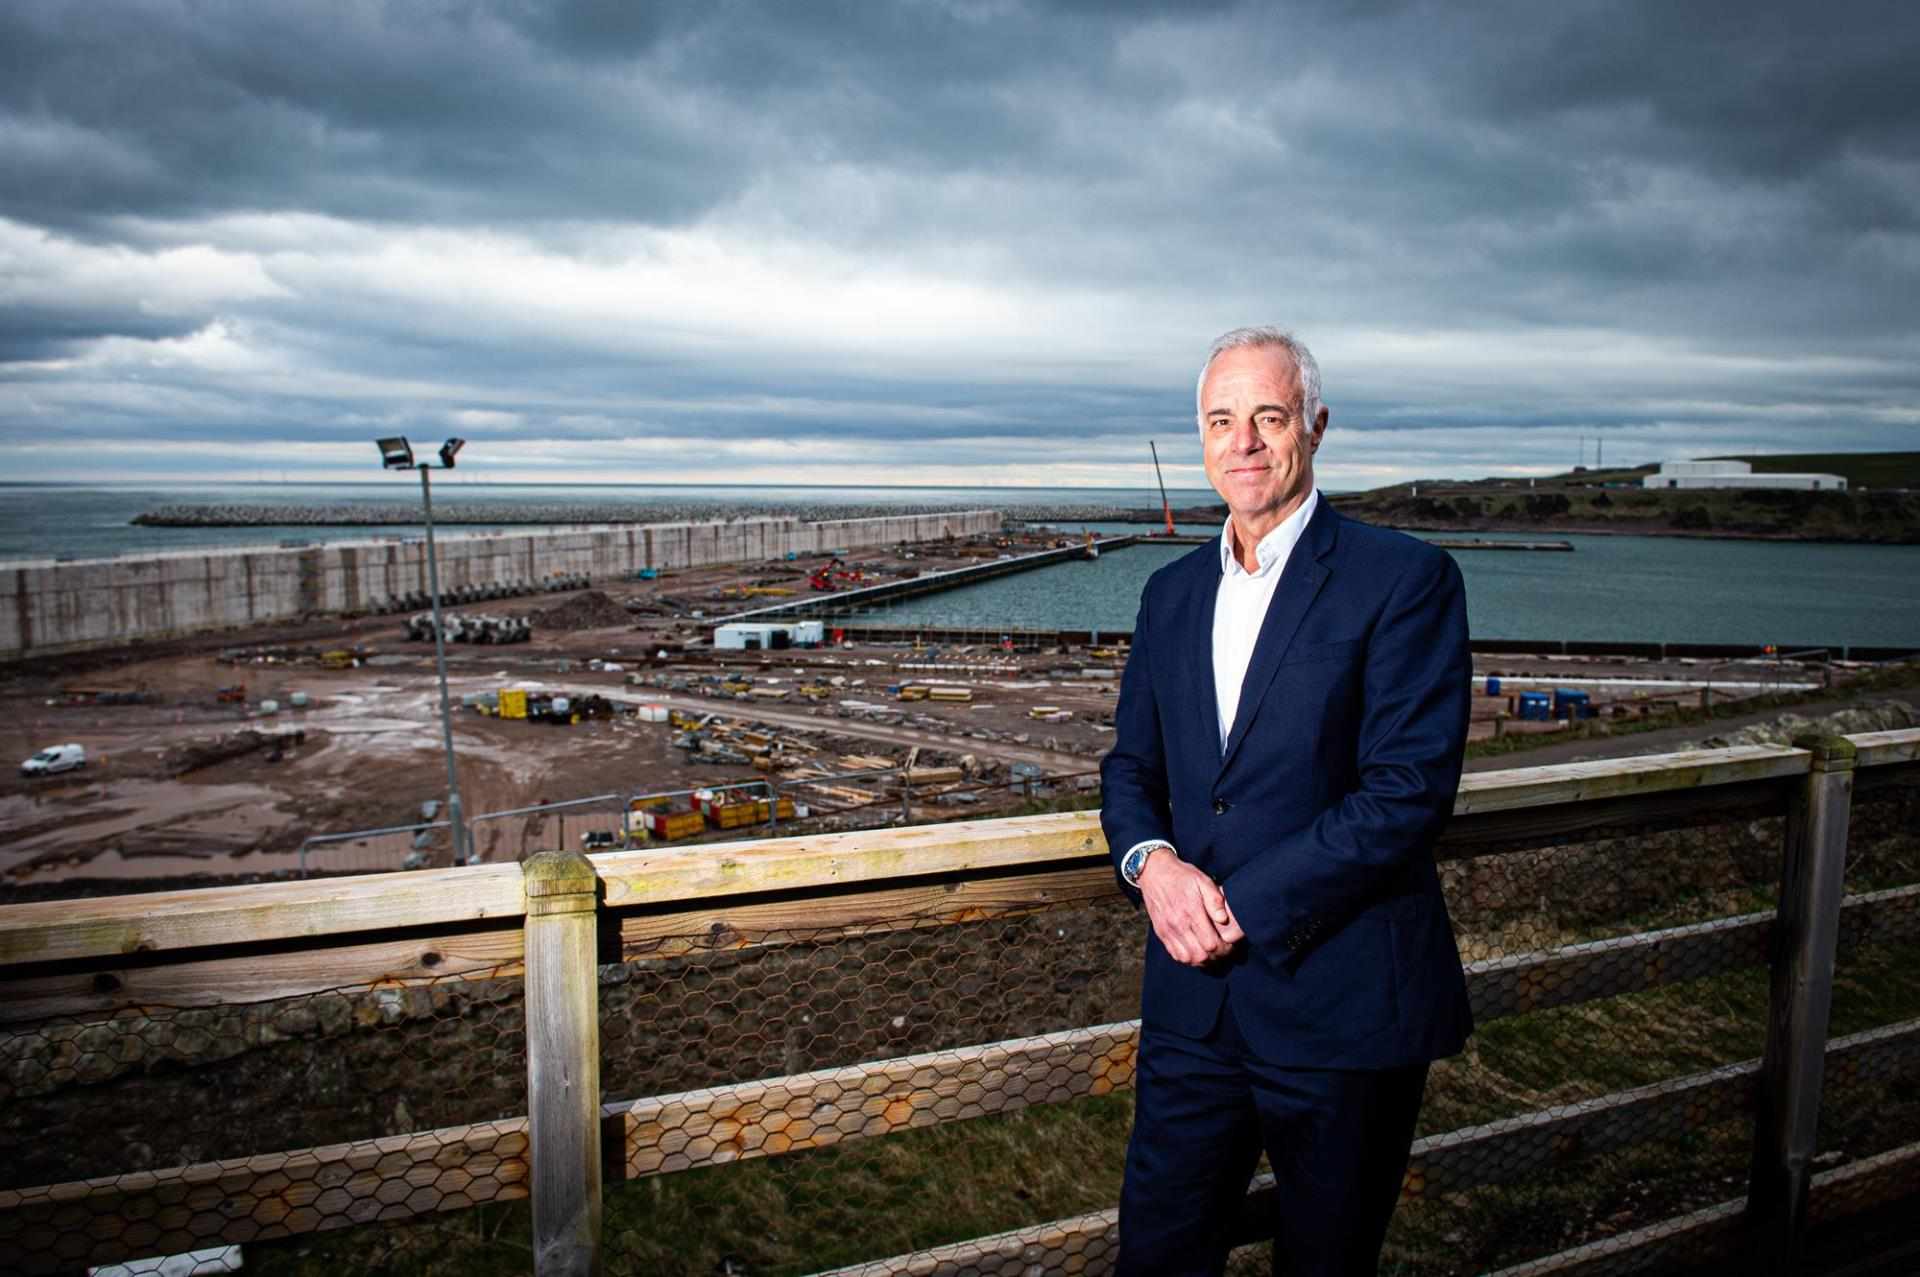 expansion,harbour,aberdeen,rebrand,takes